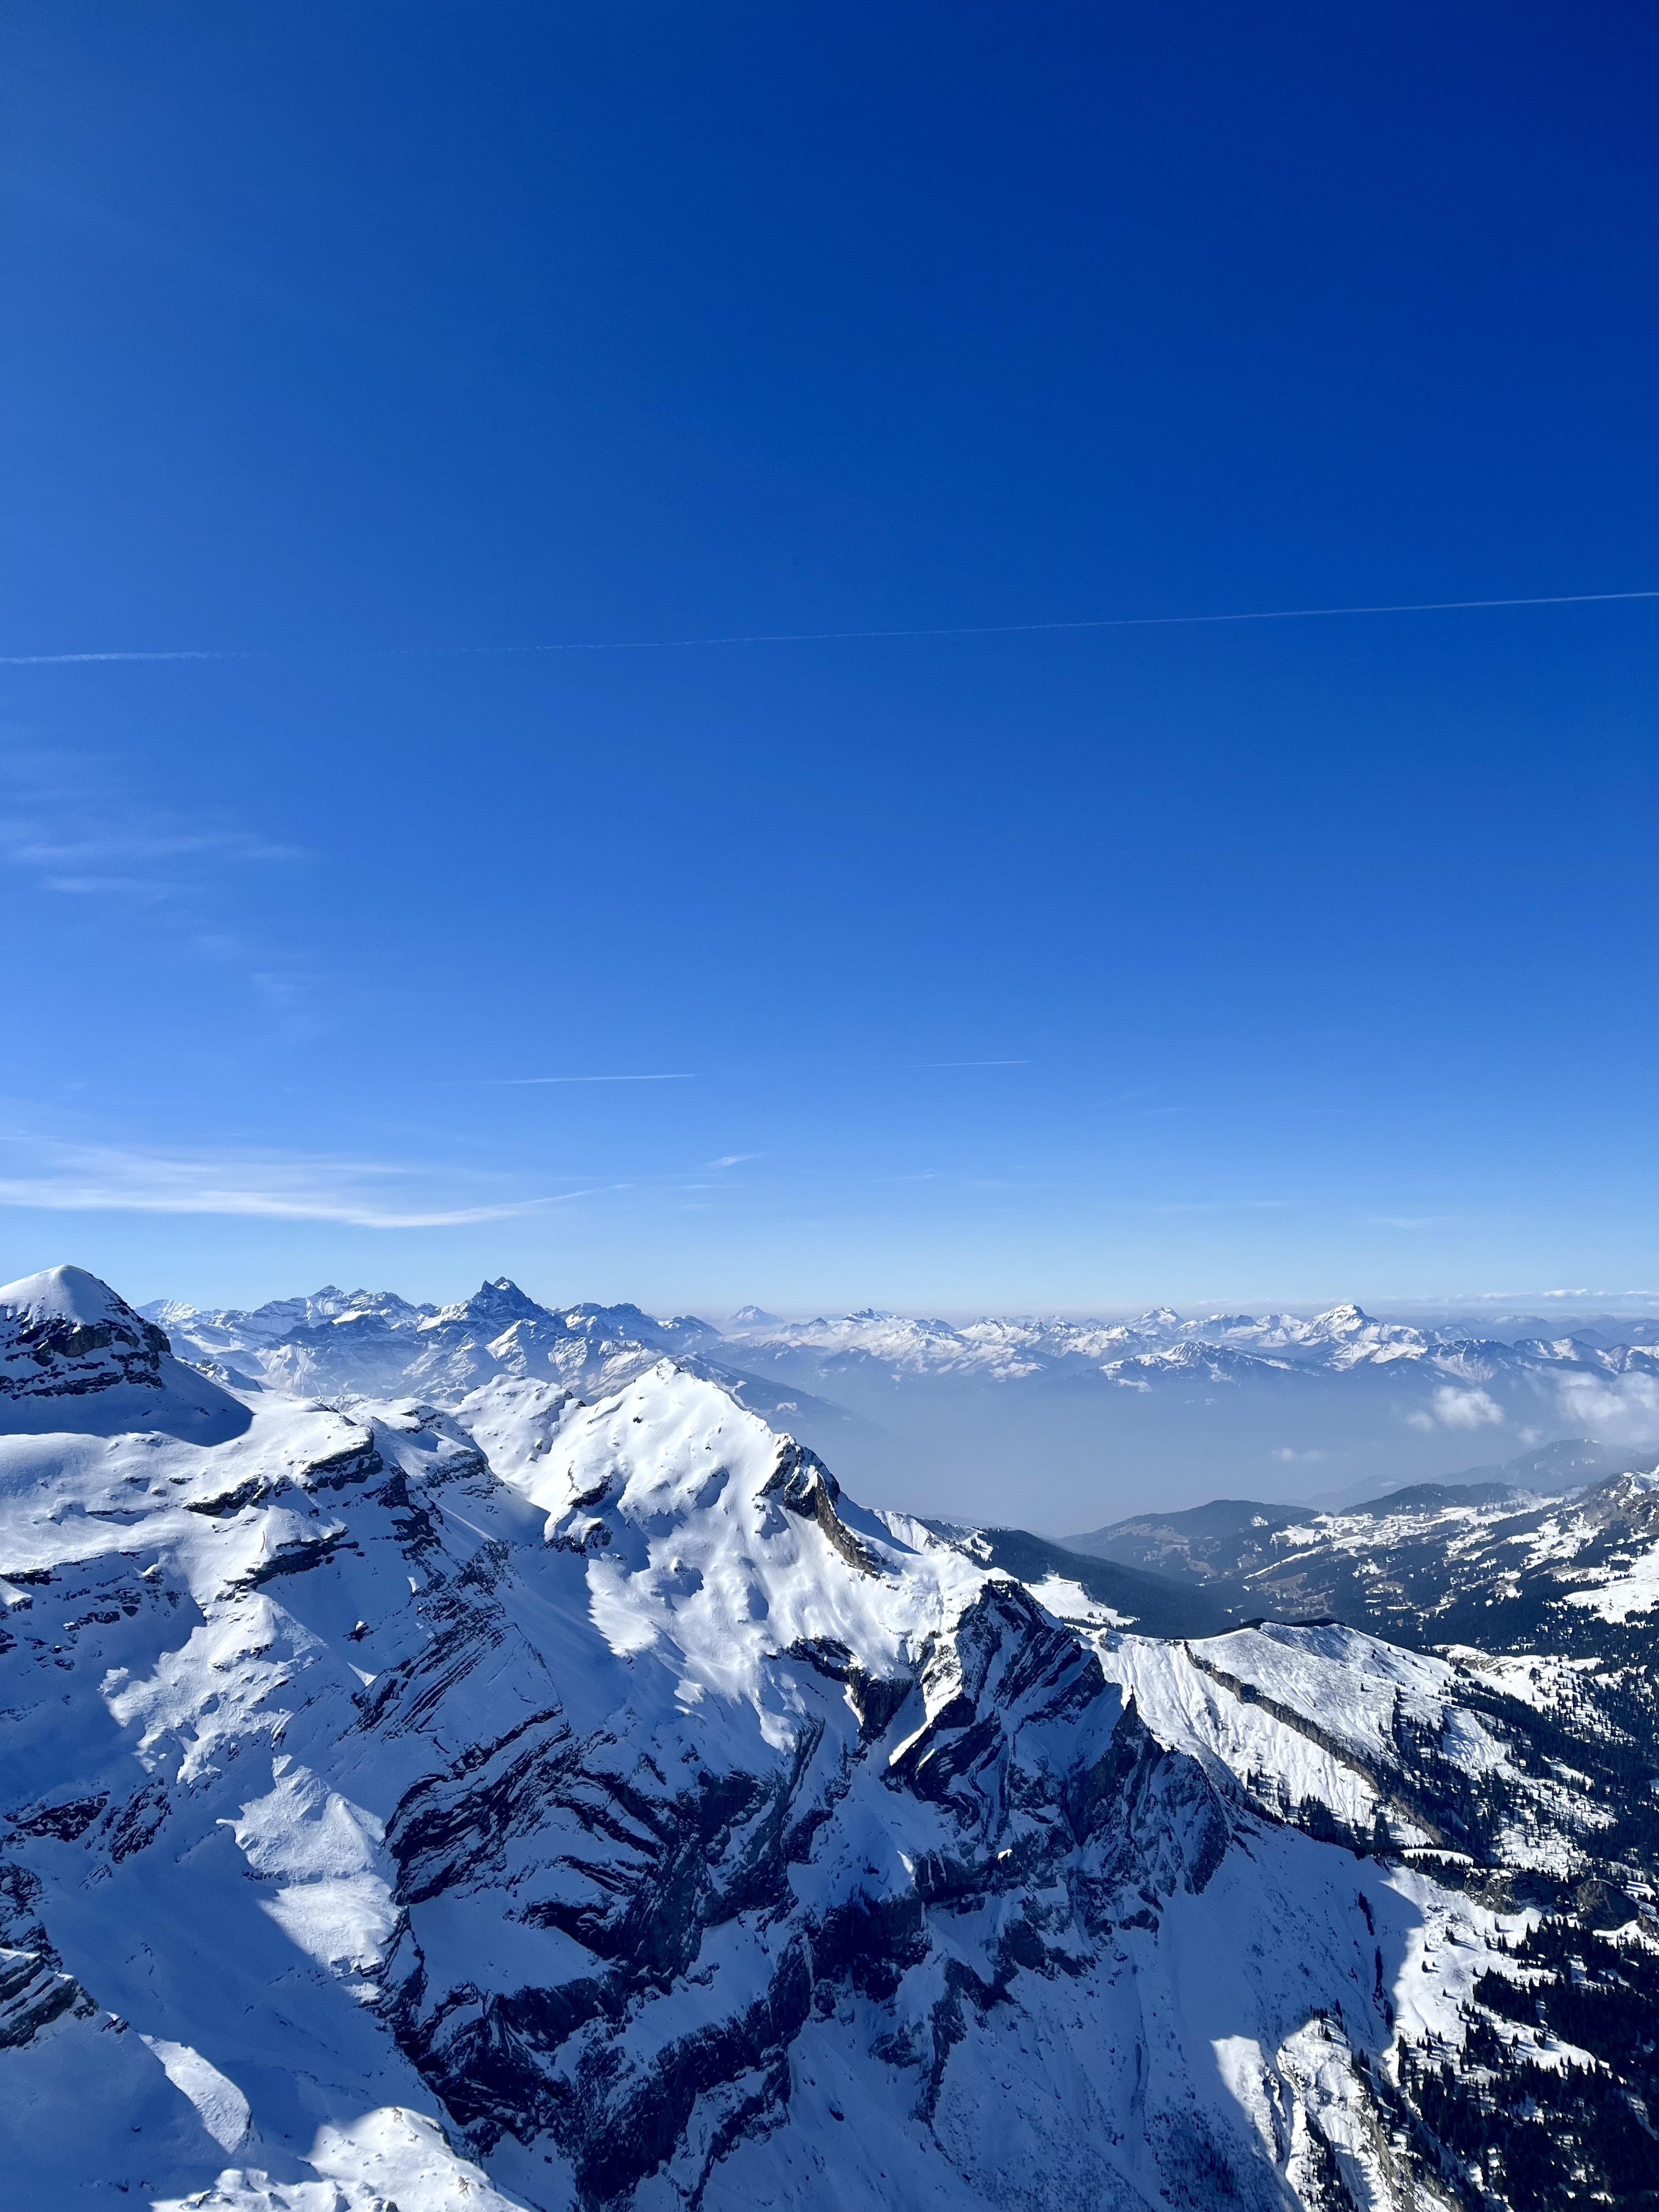 Views of the Swiss Alps at an altitude of 3000m